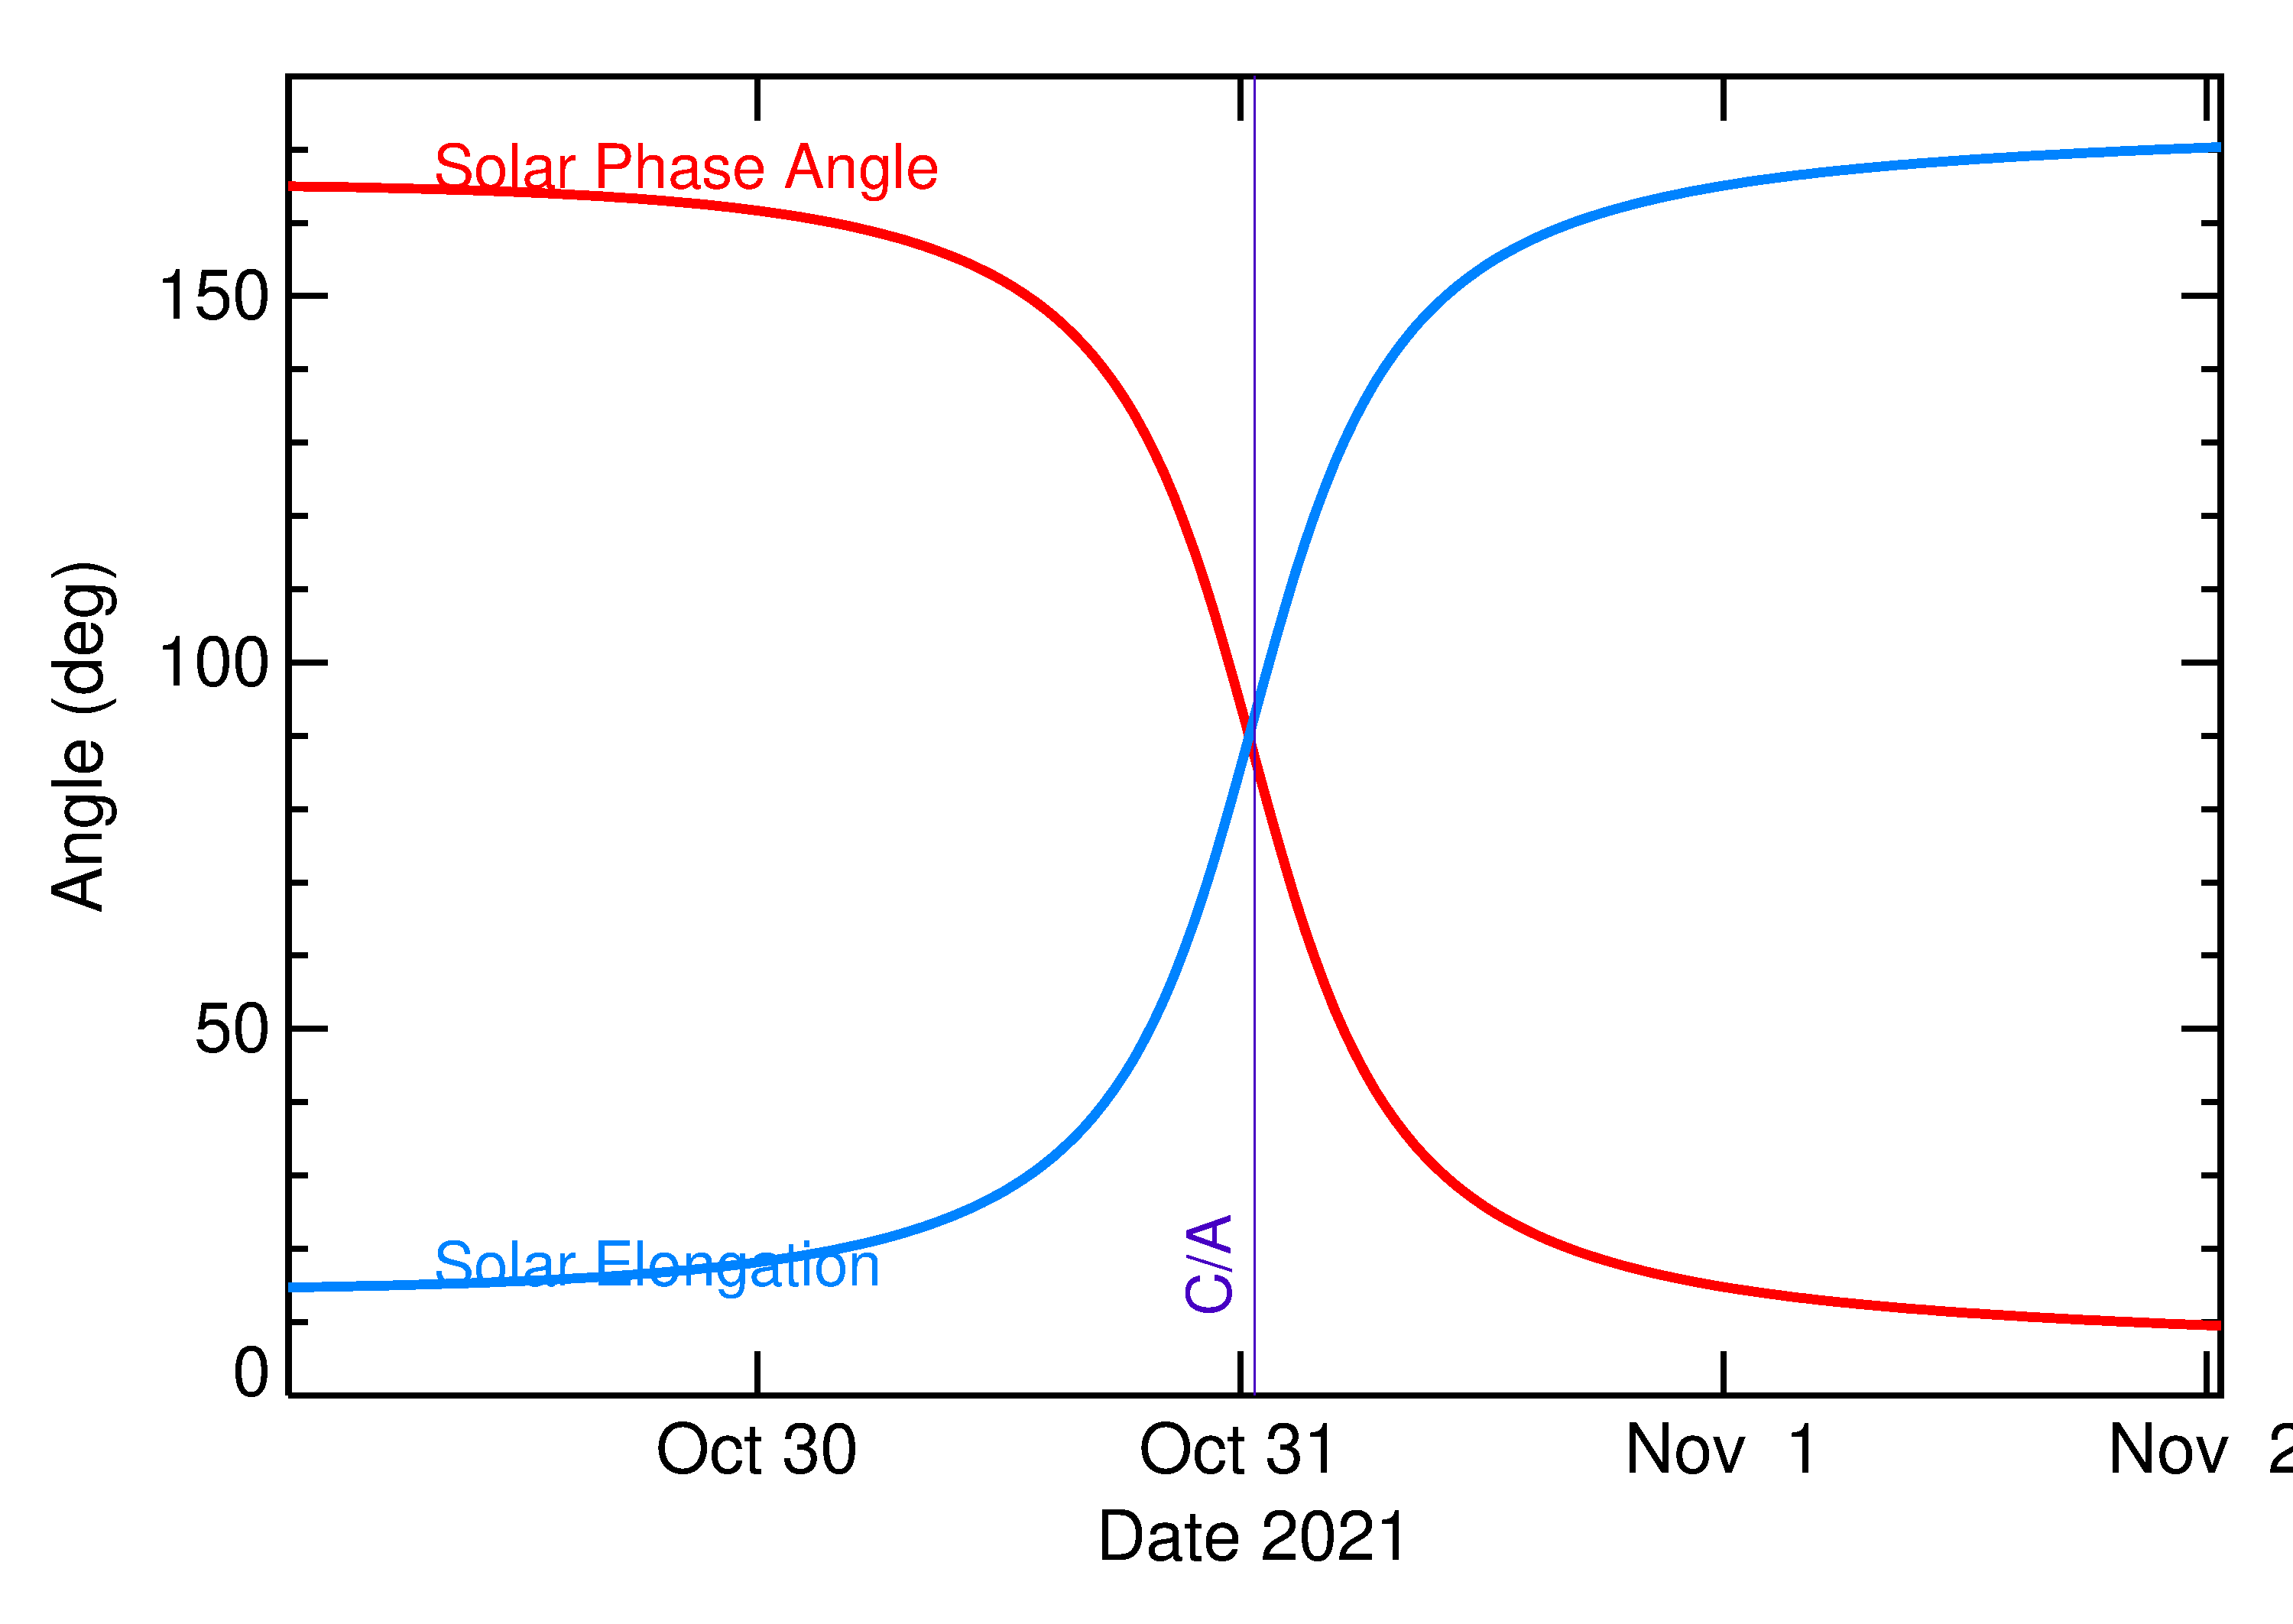 Solar Elongation and Solar Phase Angle of 2021 UJ6 in the days around closest approach